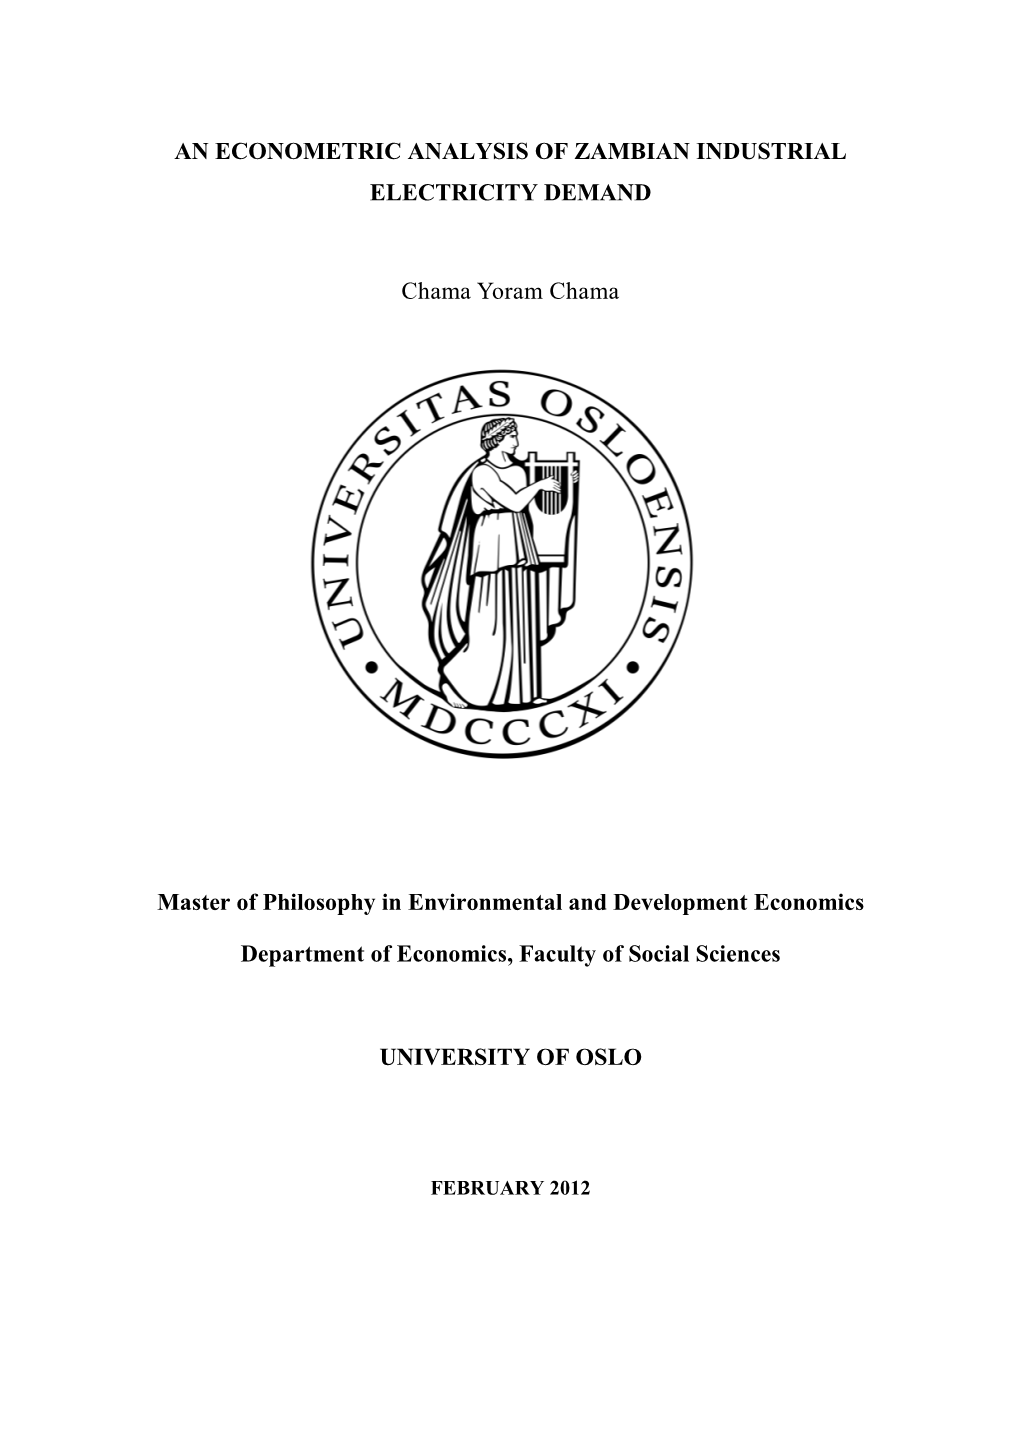 An Econometric Analysis of Zambian Industrial Electricity Demand